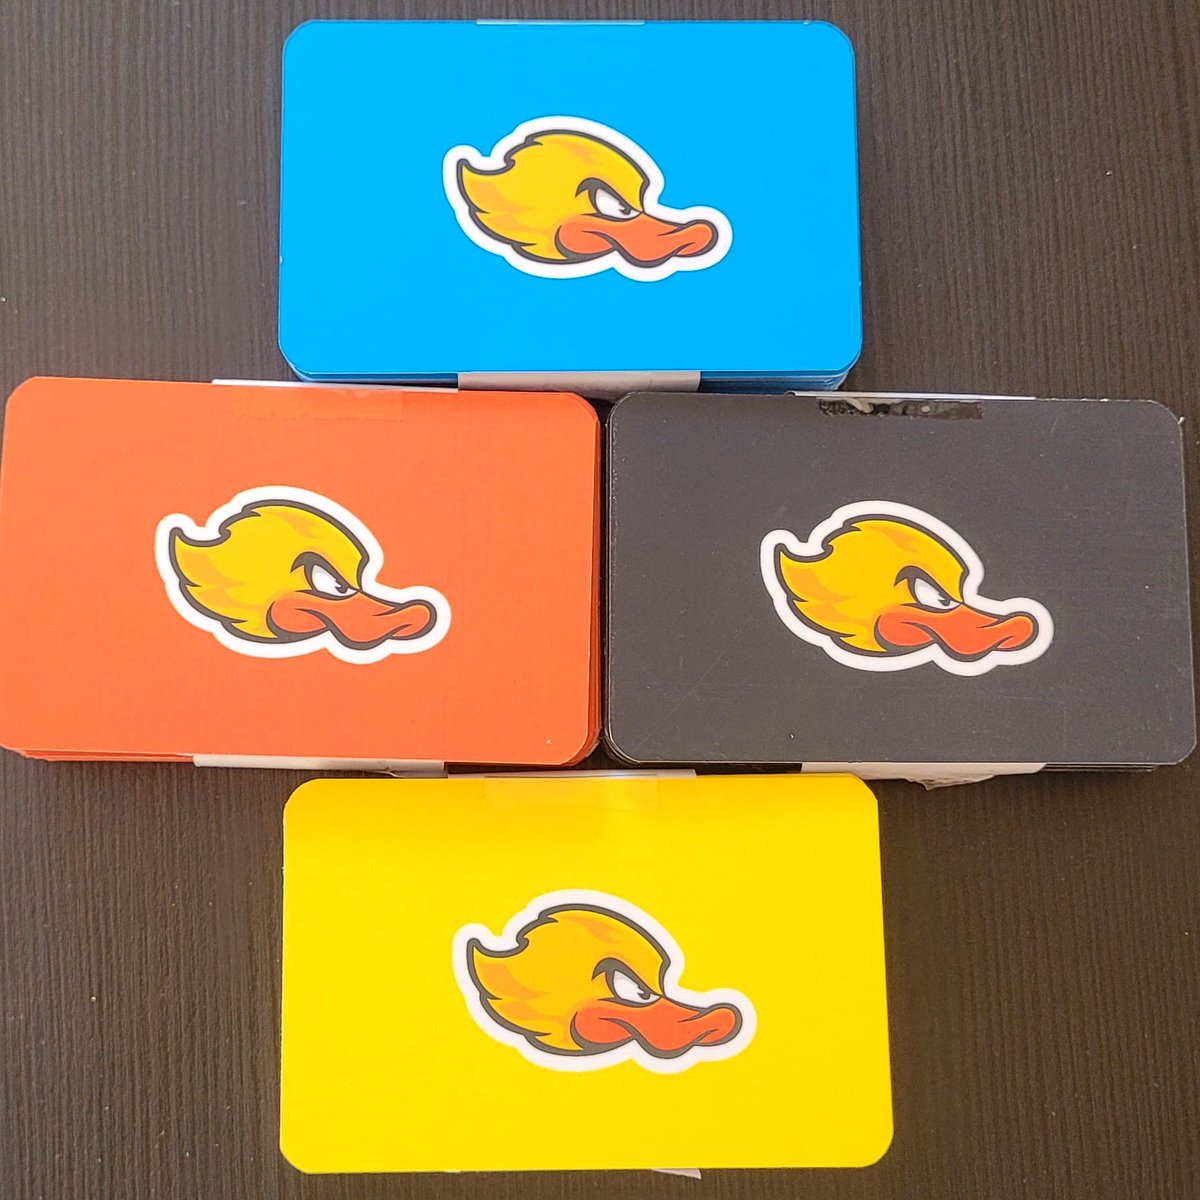 The duck squad is ready for the mission! If you'll be at #wnconf - come to my indie showcase stand to get one of these and try my game :)
#businesscards